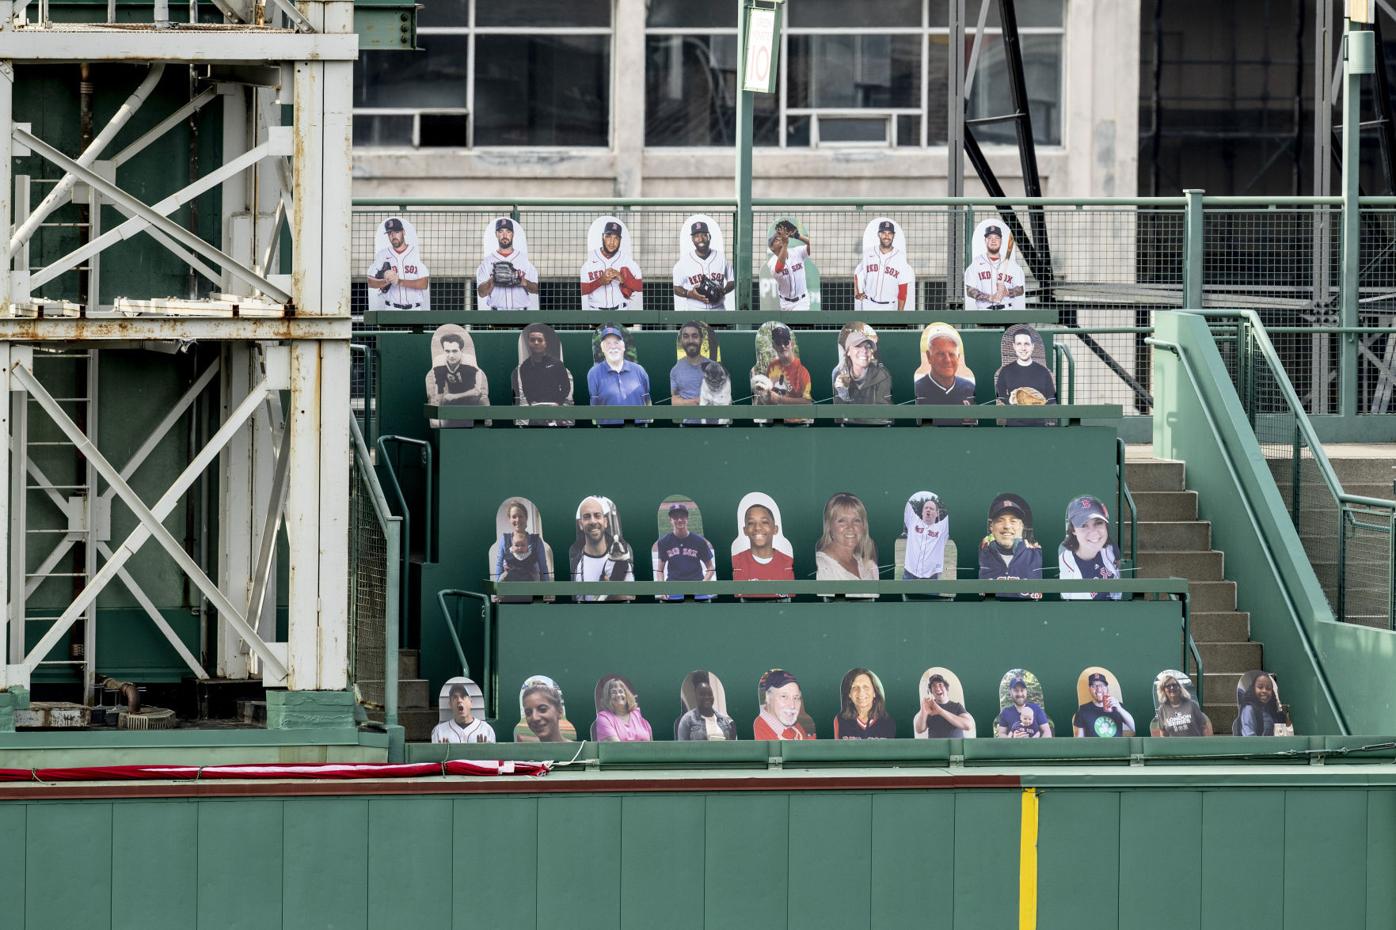 $500 to the Red Sox Foundation gets your likeness atop the Green